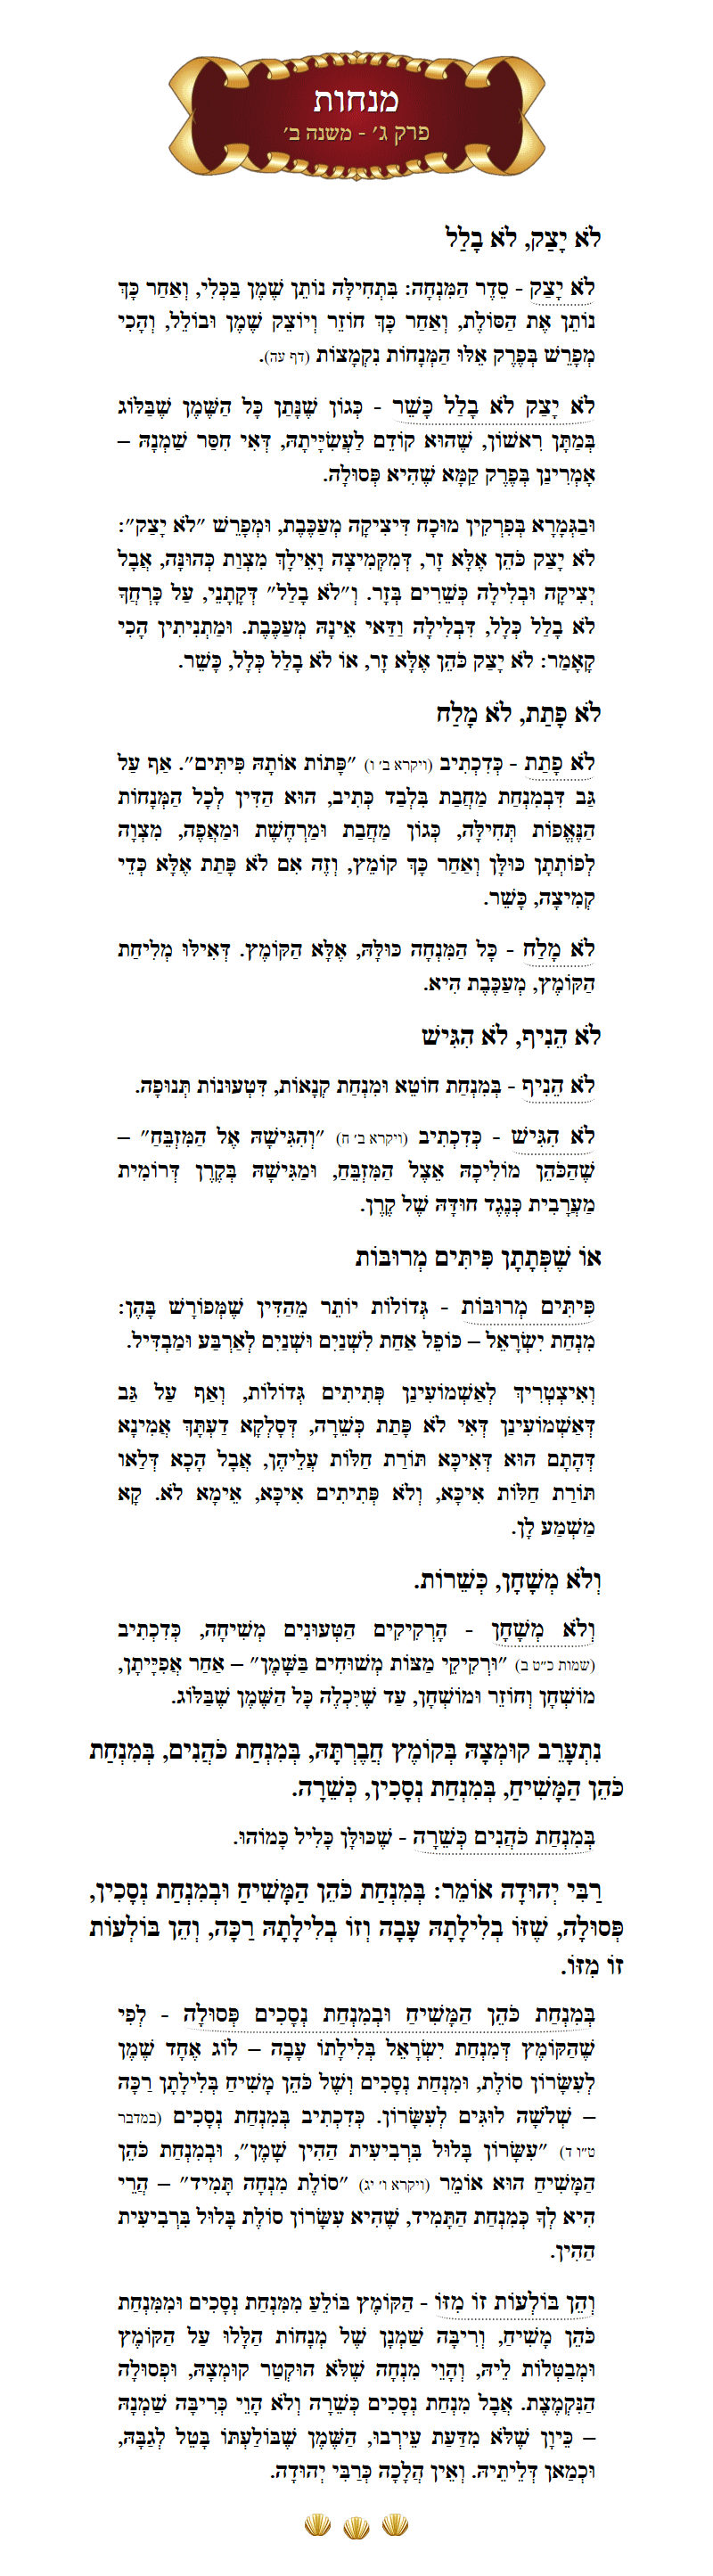 Masechta Menachos Chapter 3 Mishnah 2 with commentary